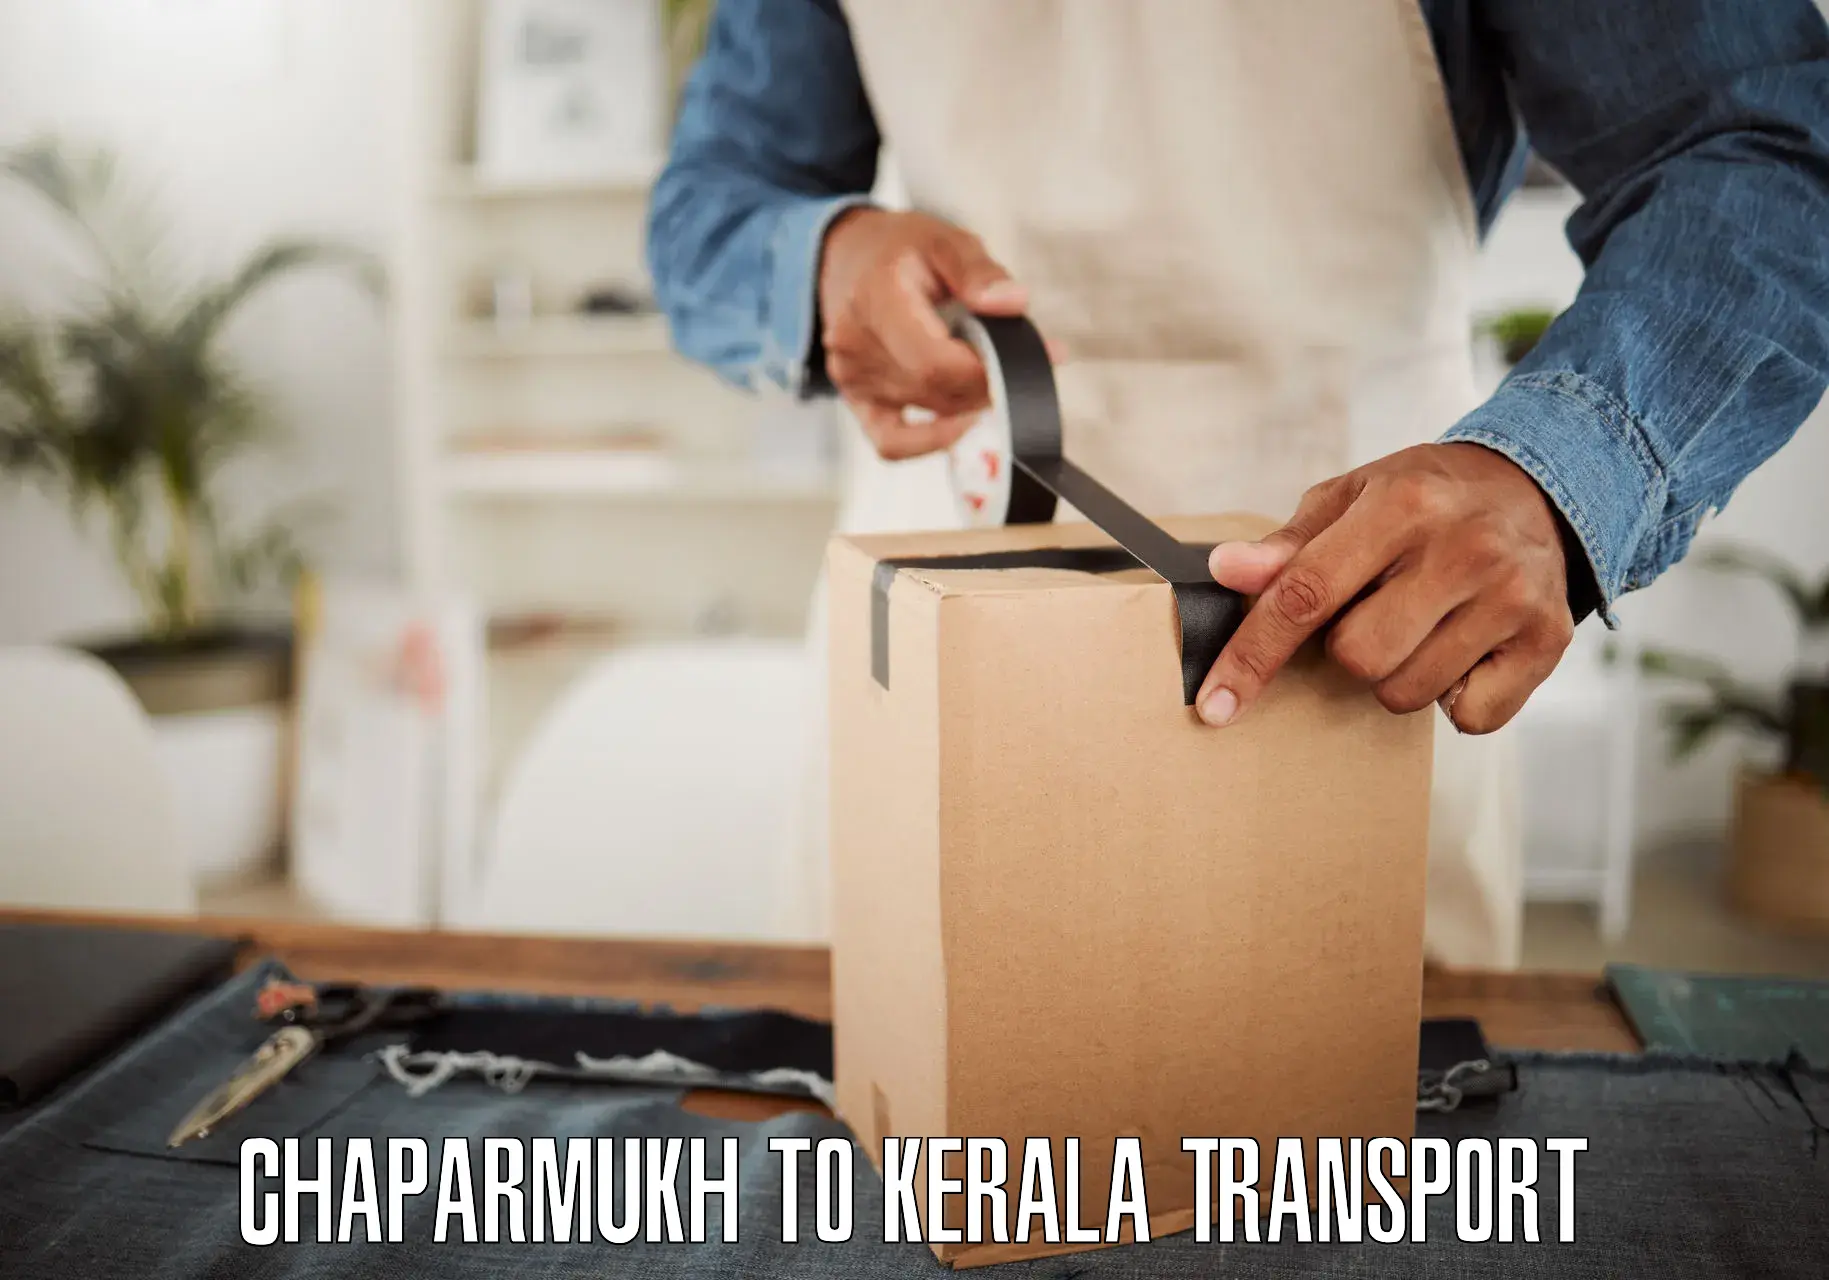 Domestic transport services Chaparmukh to Cochin University of Science and Technology